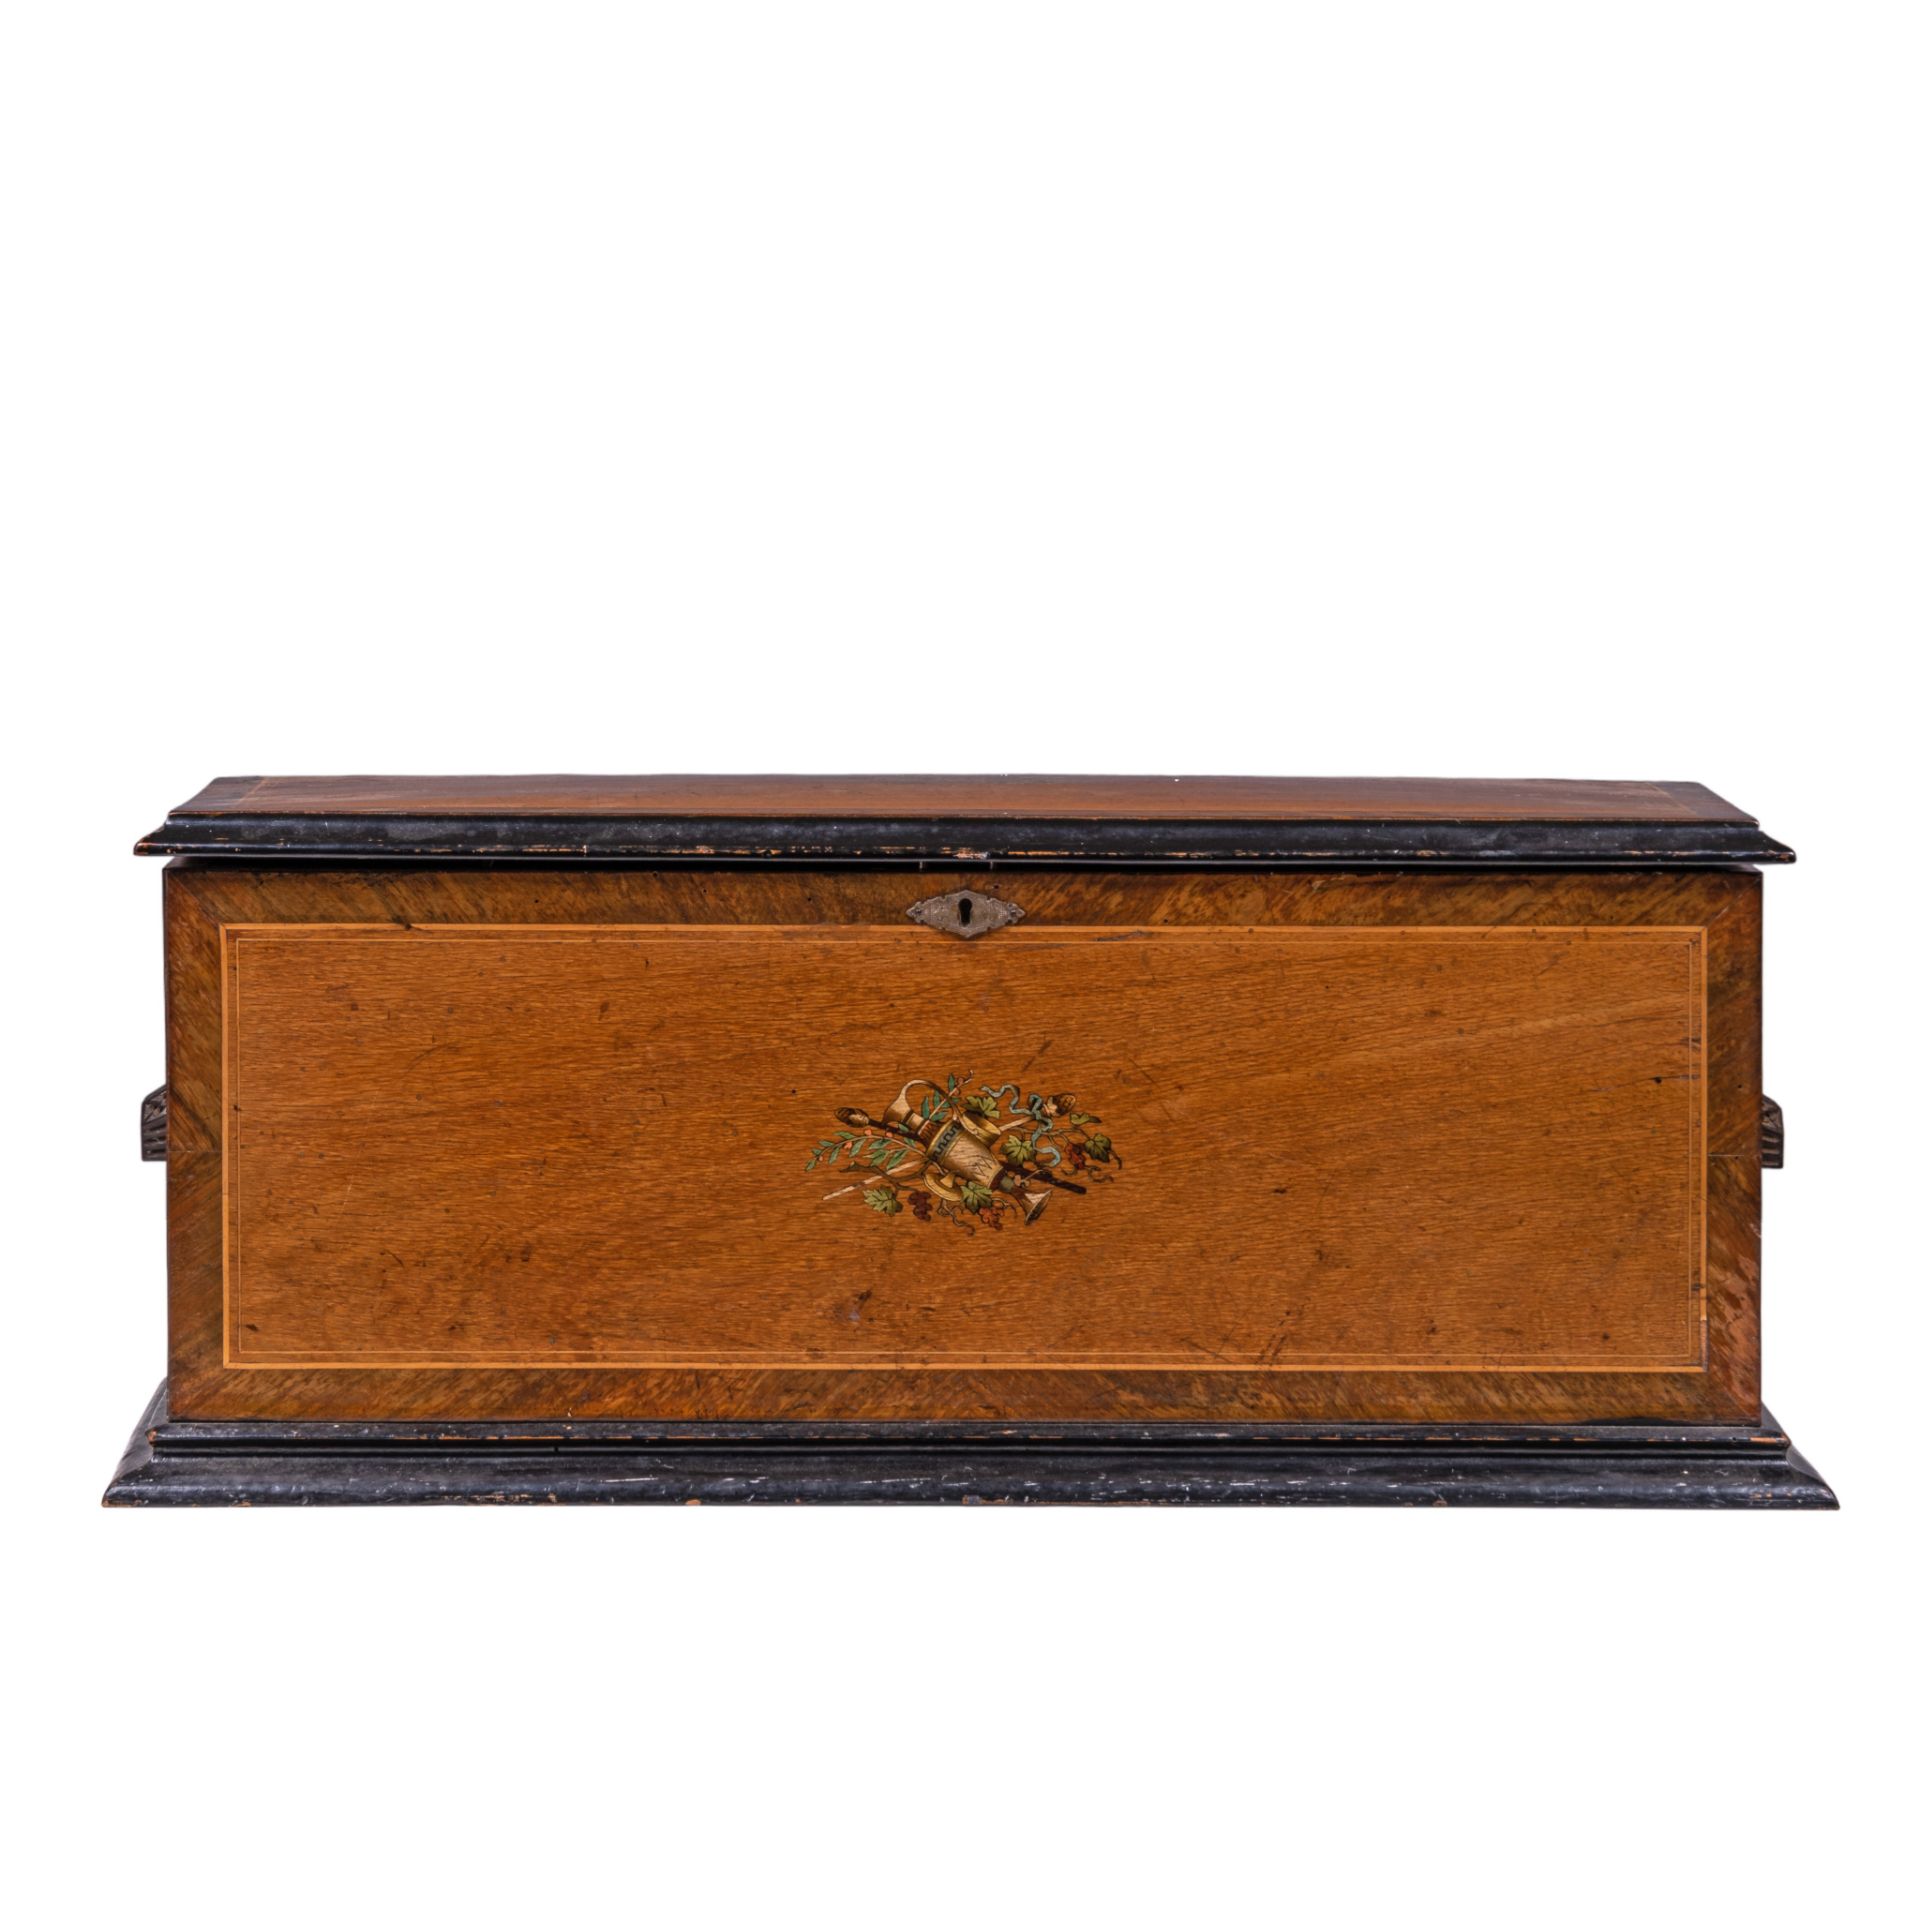 A Victorian mahogany and rosewood veneered cylinder musical box, 1920s, H 28,5 - W 70- D 37 cm - Image 2 of 10